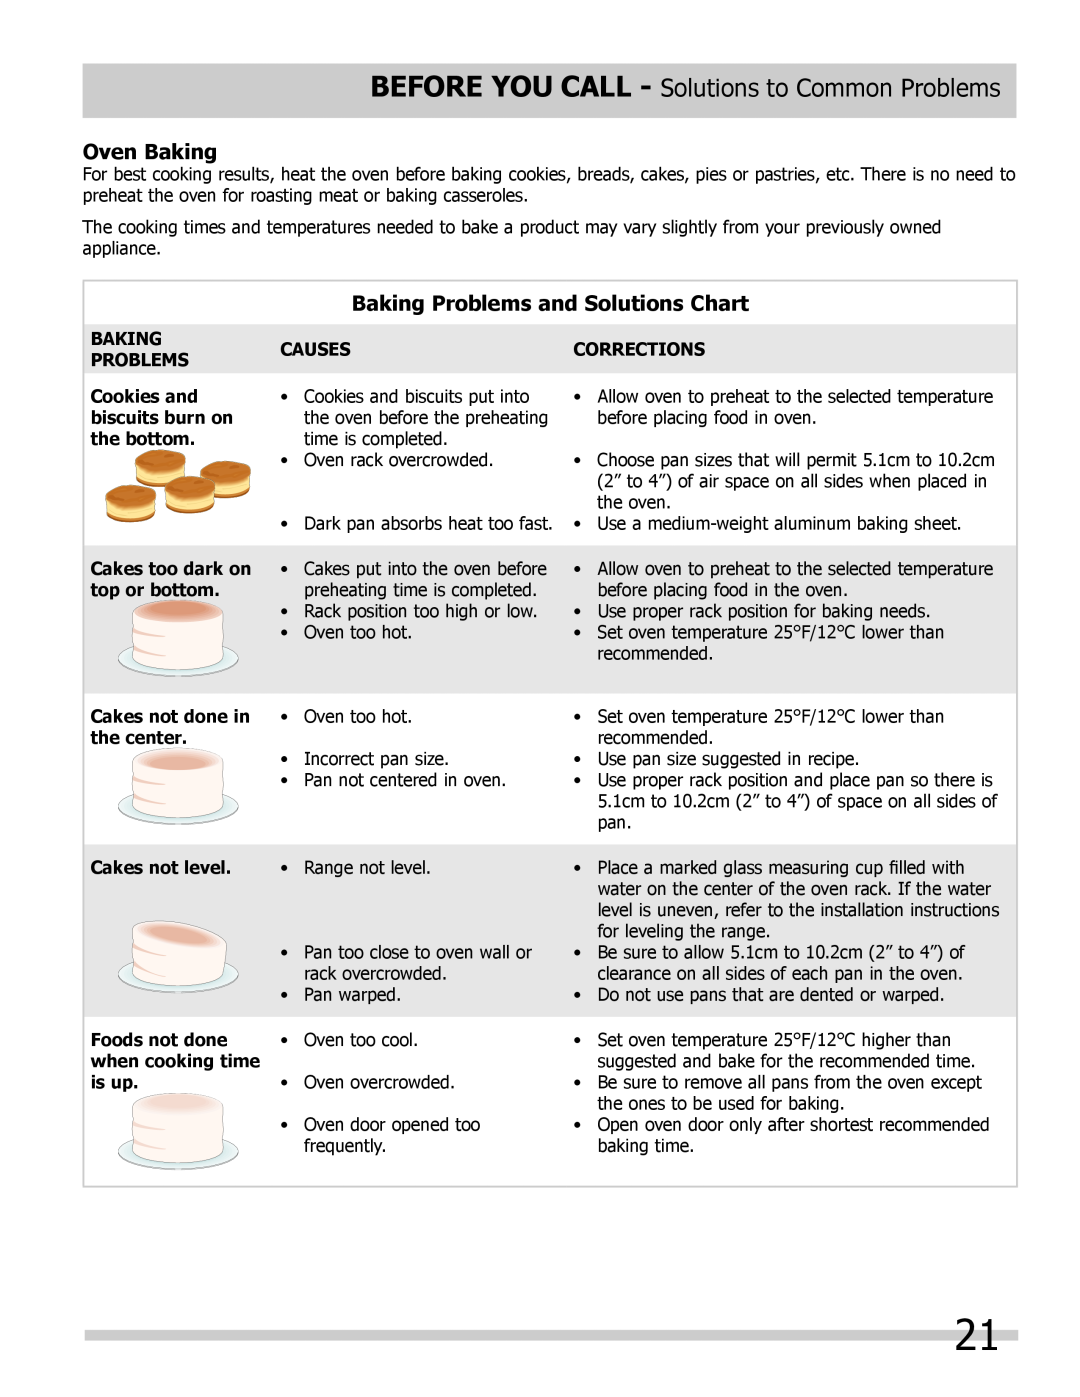 Frigidaire 318200964 Before you call - Solutions to Common Problems, Oven Baking, Baking Problems and Solutions Chart 